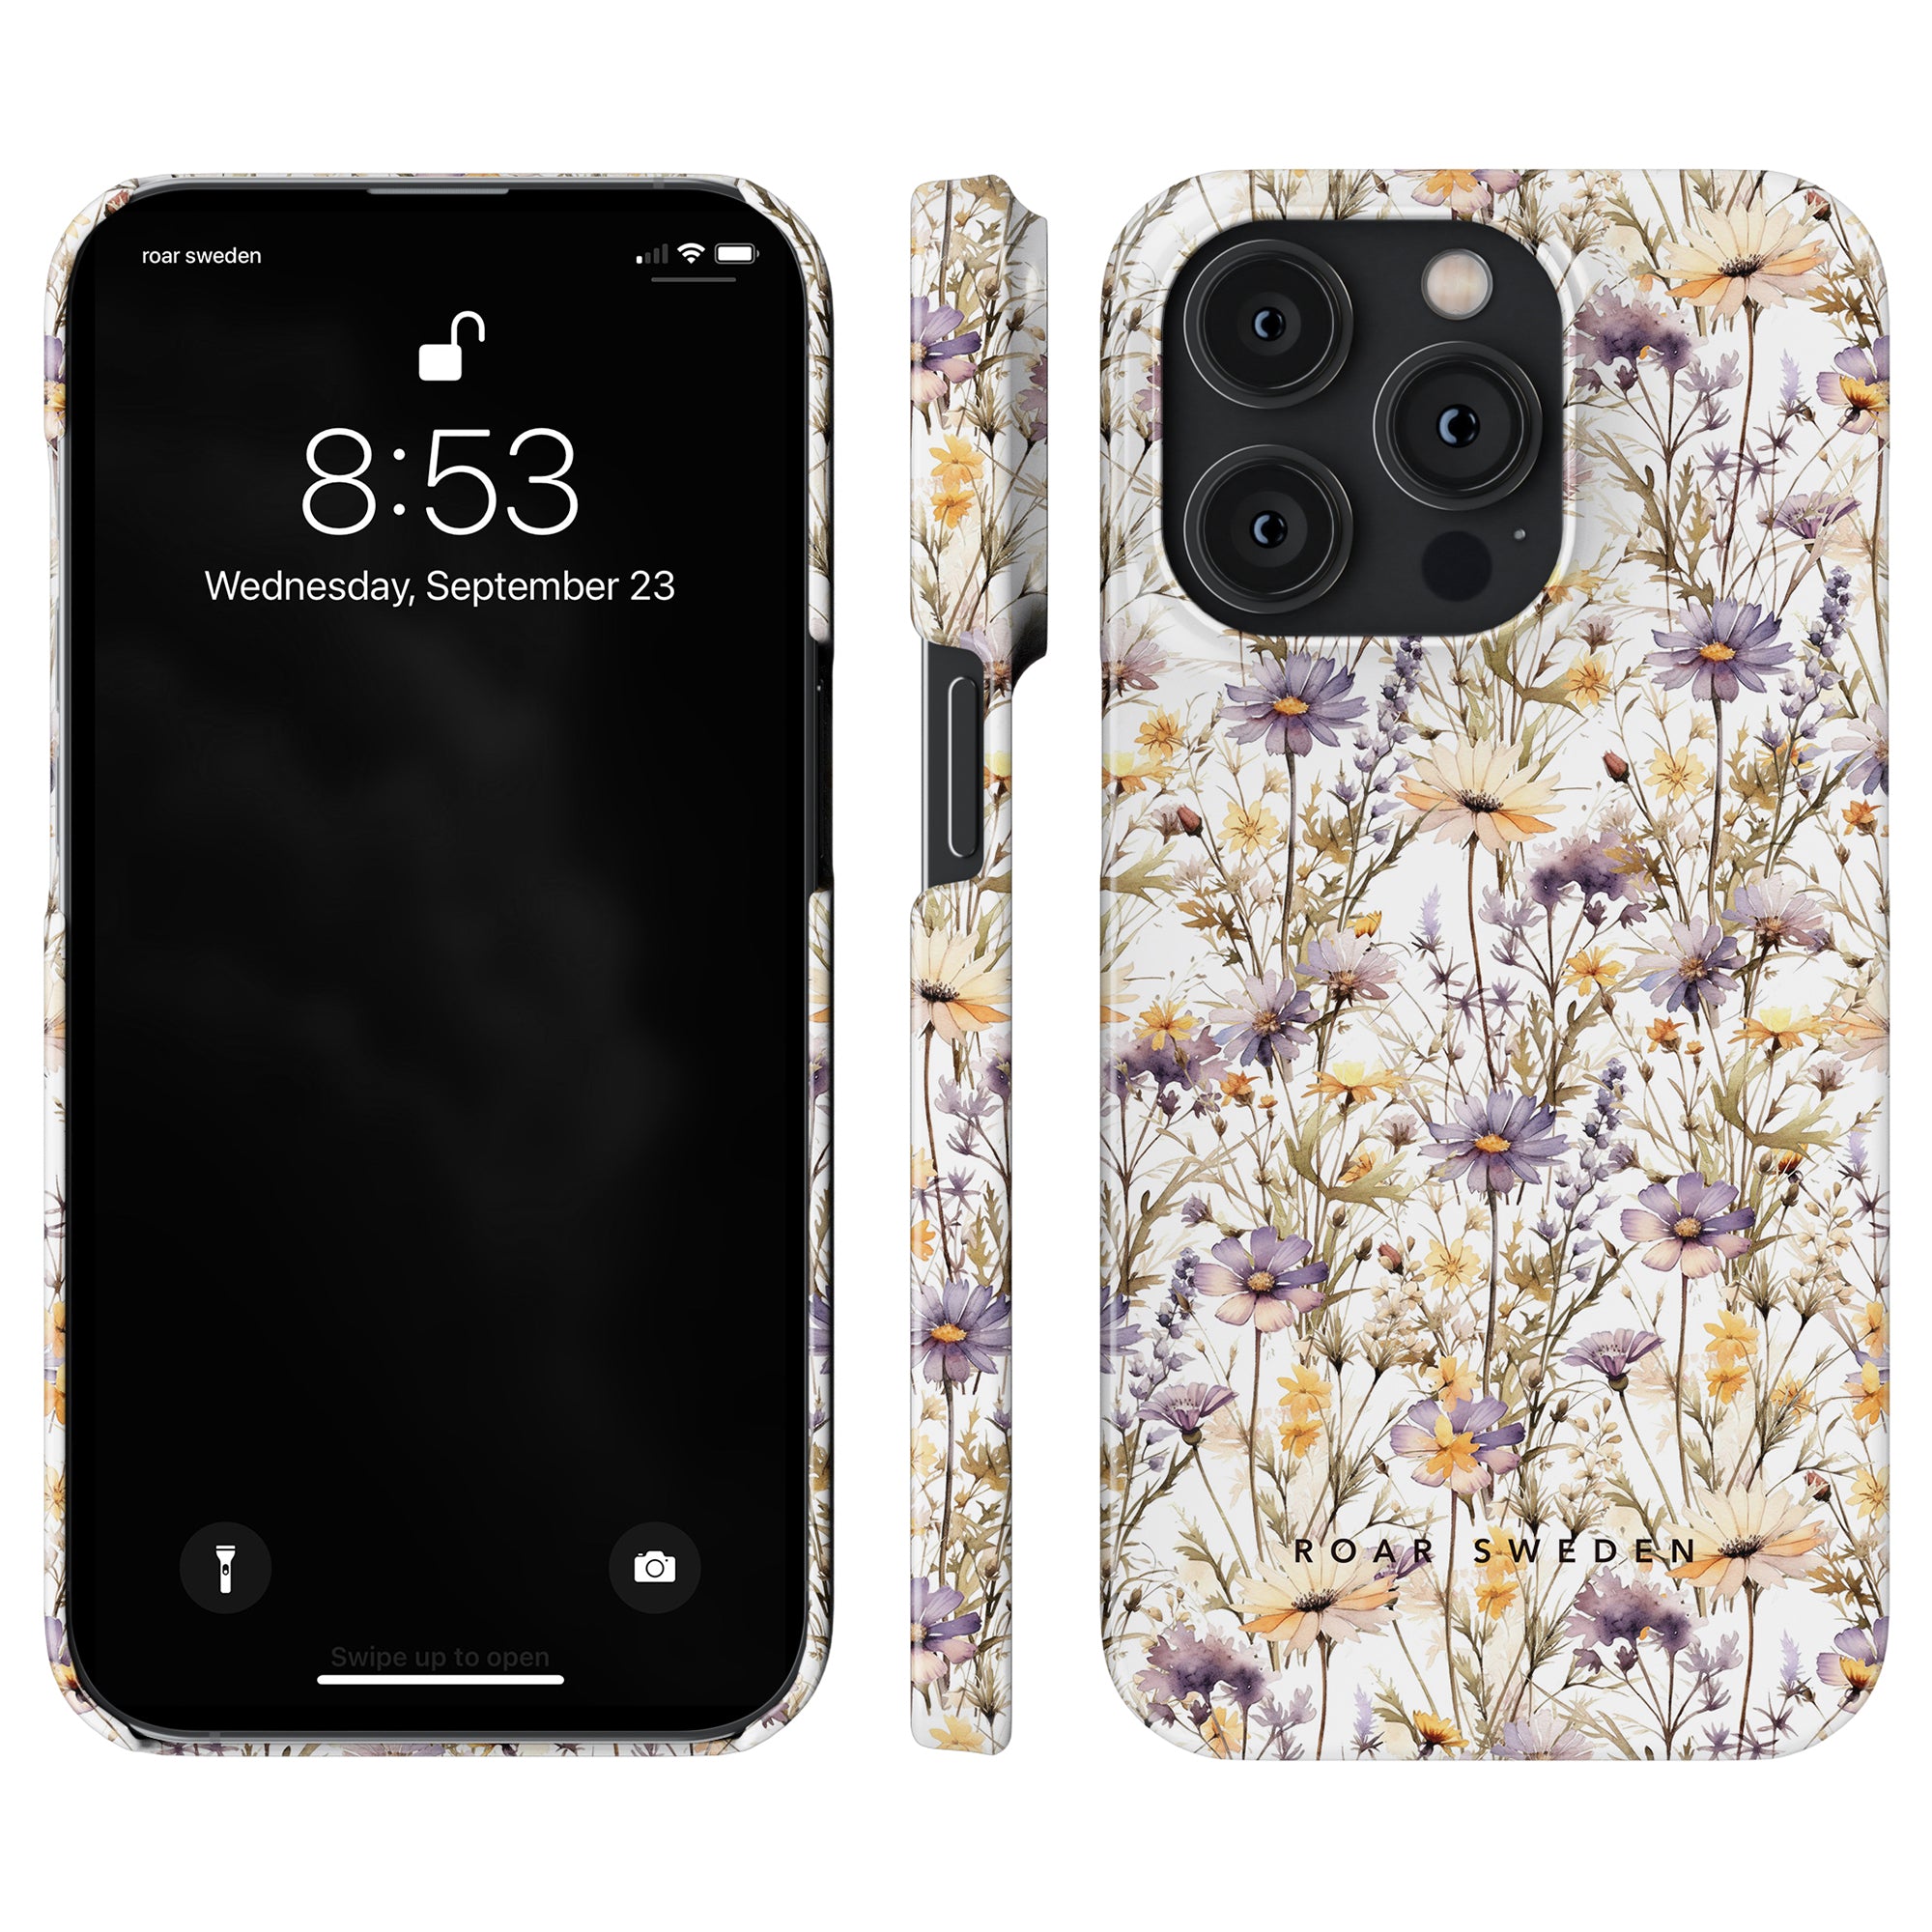 Purple Wildflower - Slim case from the Flower Collection showing the lock screen at 8:53 AM, Wednesday, September 23. The slim case features a design of daisies and other flowers in muted colors with purple wildflower accents and the brand 'ROAR SWEDEN.'